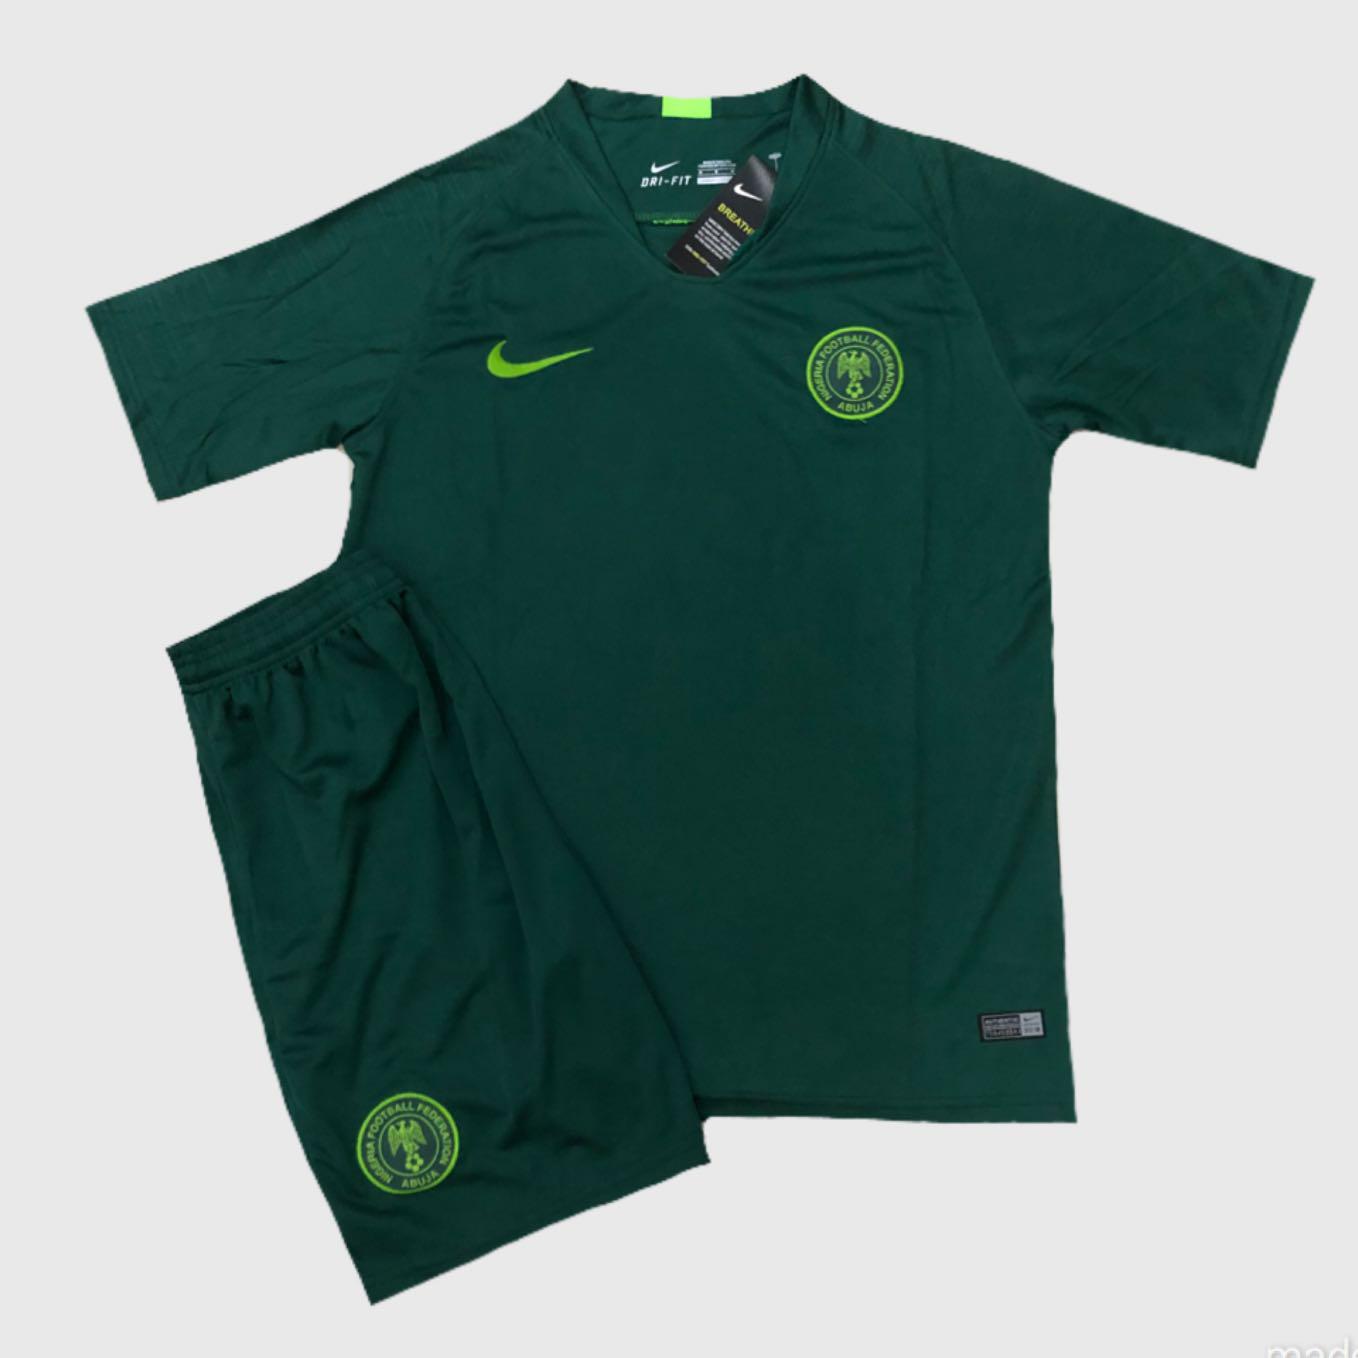 nigeria jersey for sale